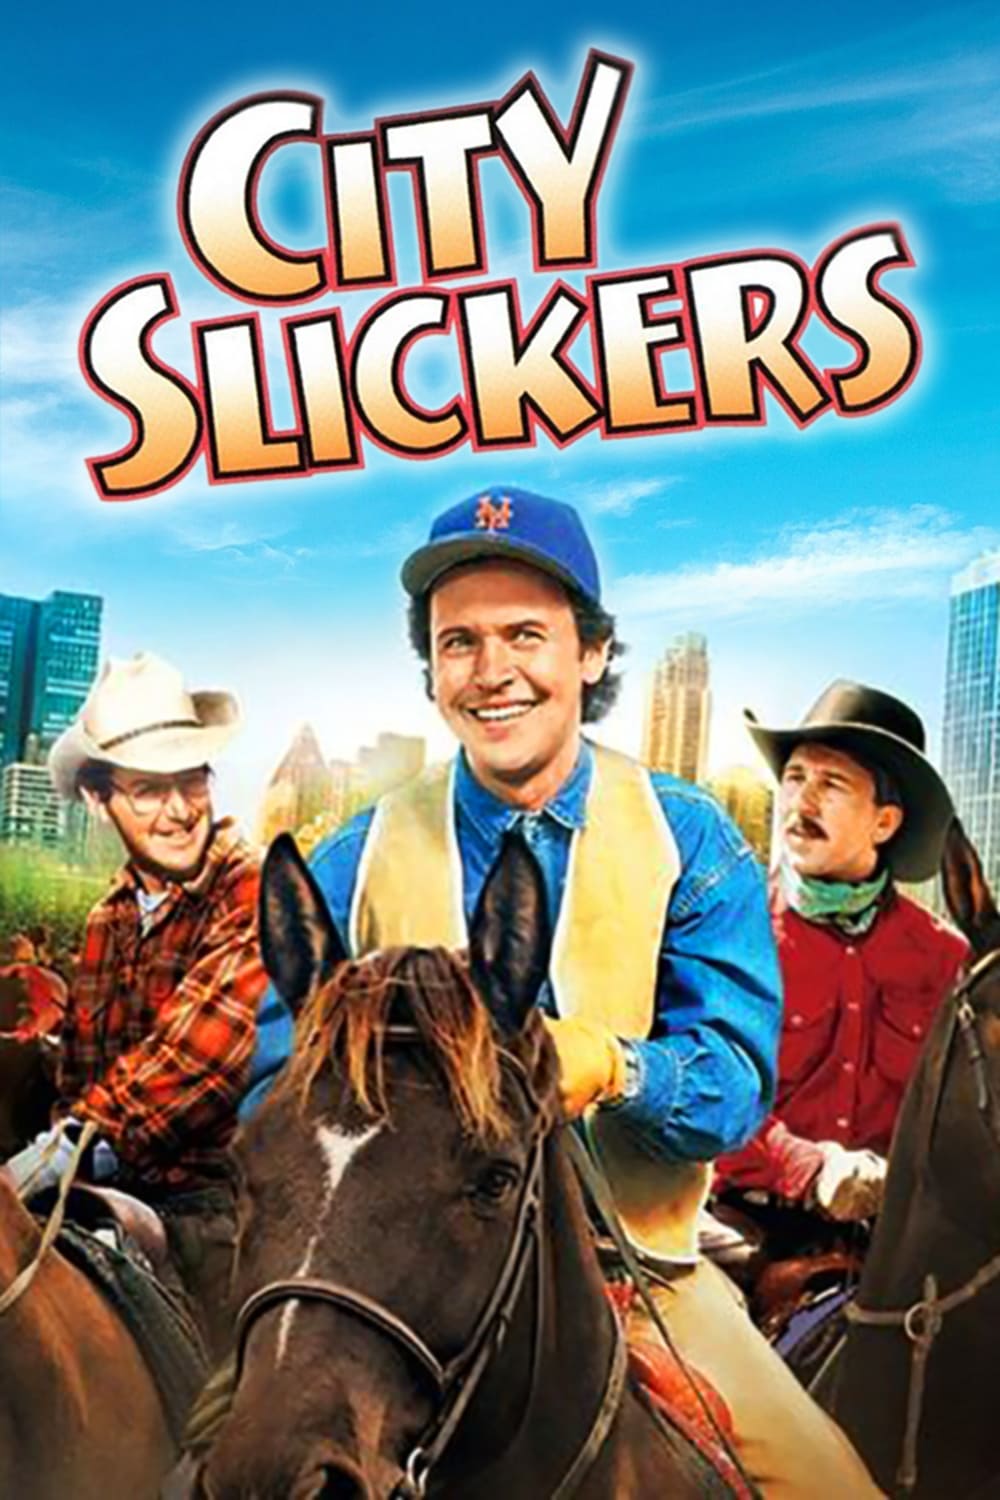 City Slickers (1991) Movie Poster Framed or Unframed Glossy Poster Free UK Shipping!!!